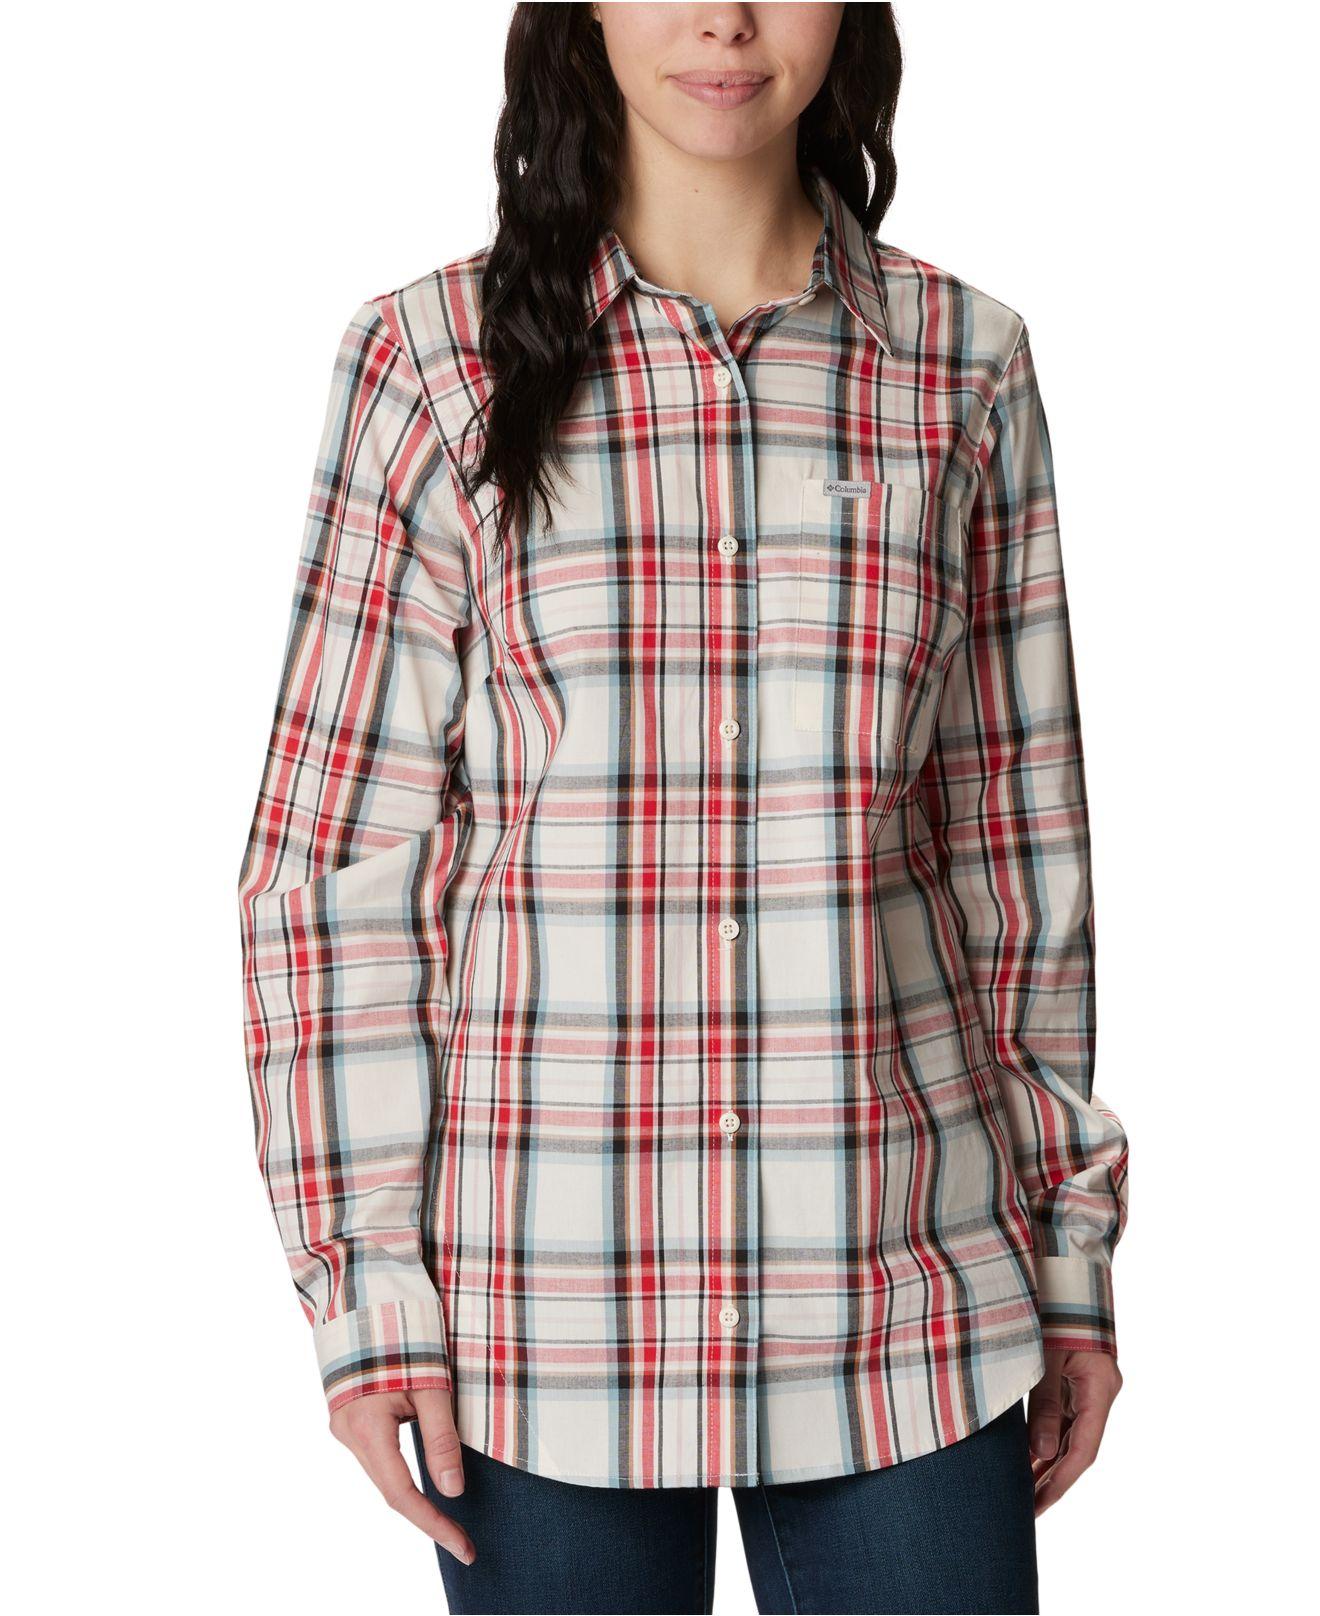 Columbia Anytime Patterned Long-sleeve Shirt in Red